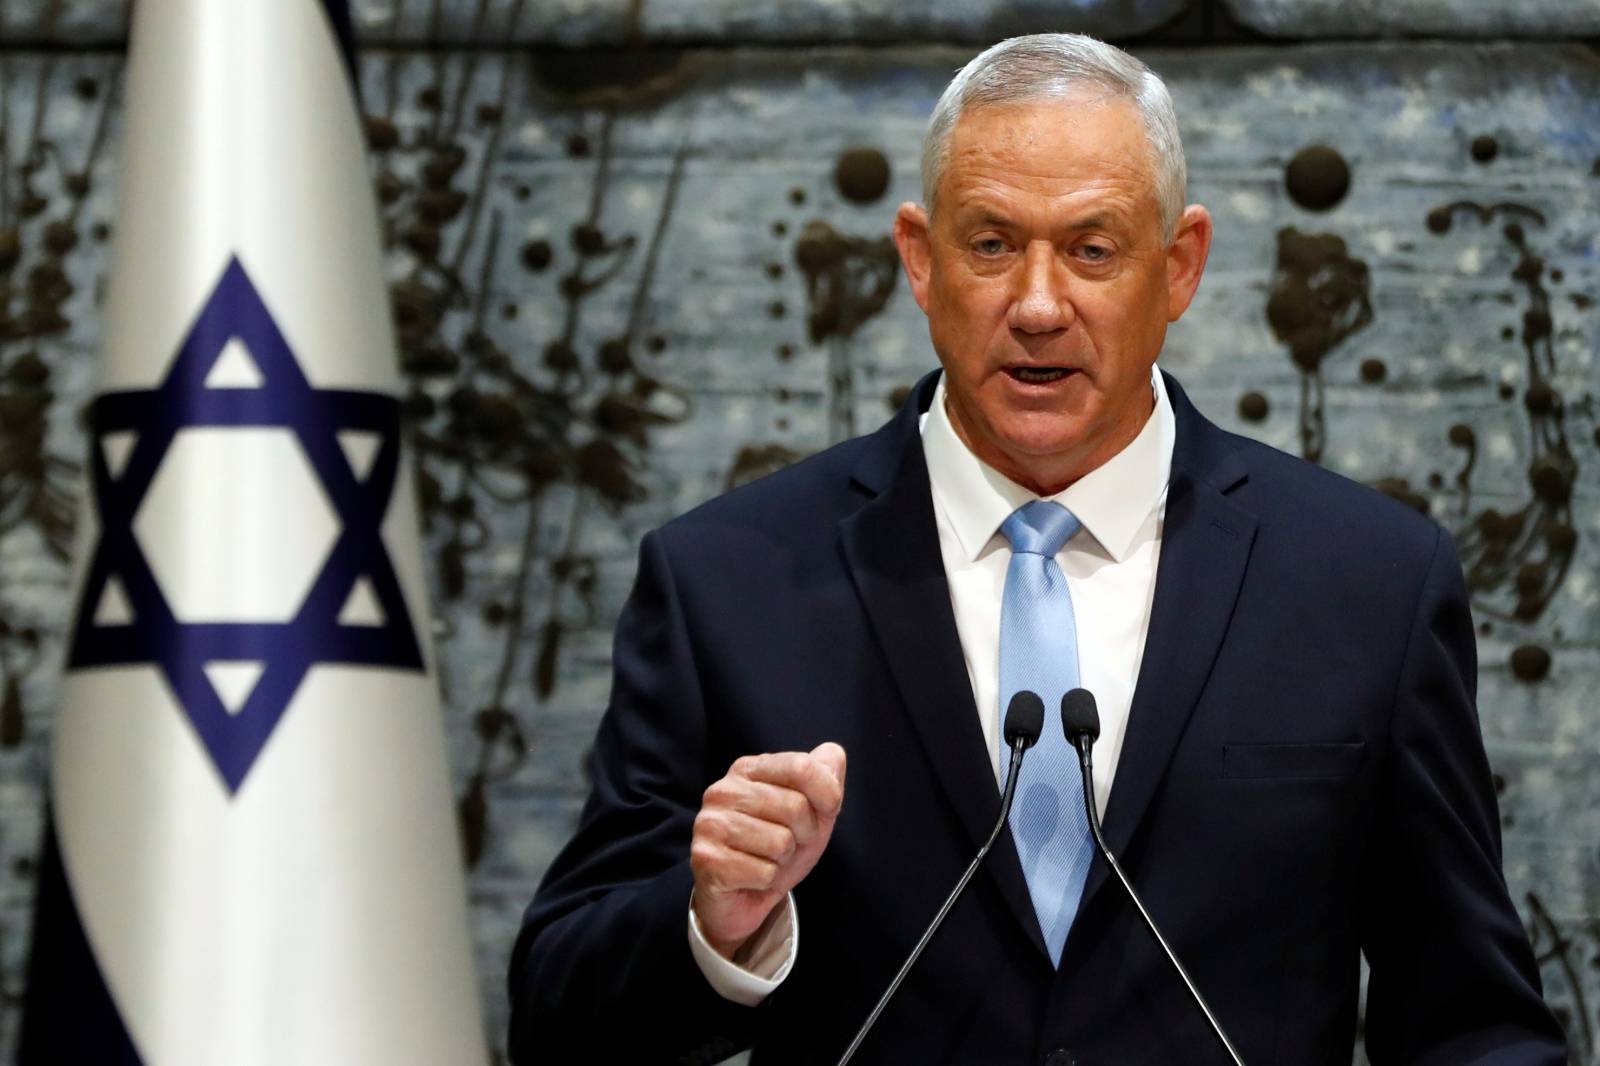 Benny Gantz, leader of Blue and White party, speaks during a nomination ceremony at the President's residency in Jerusalem